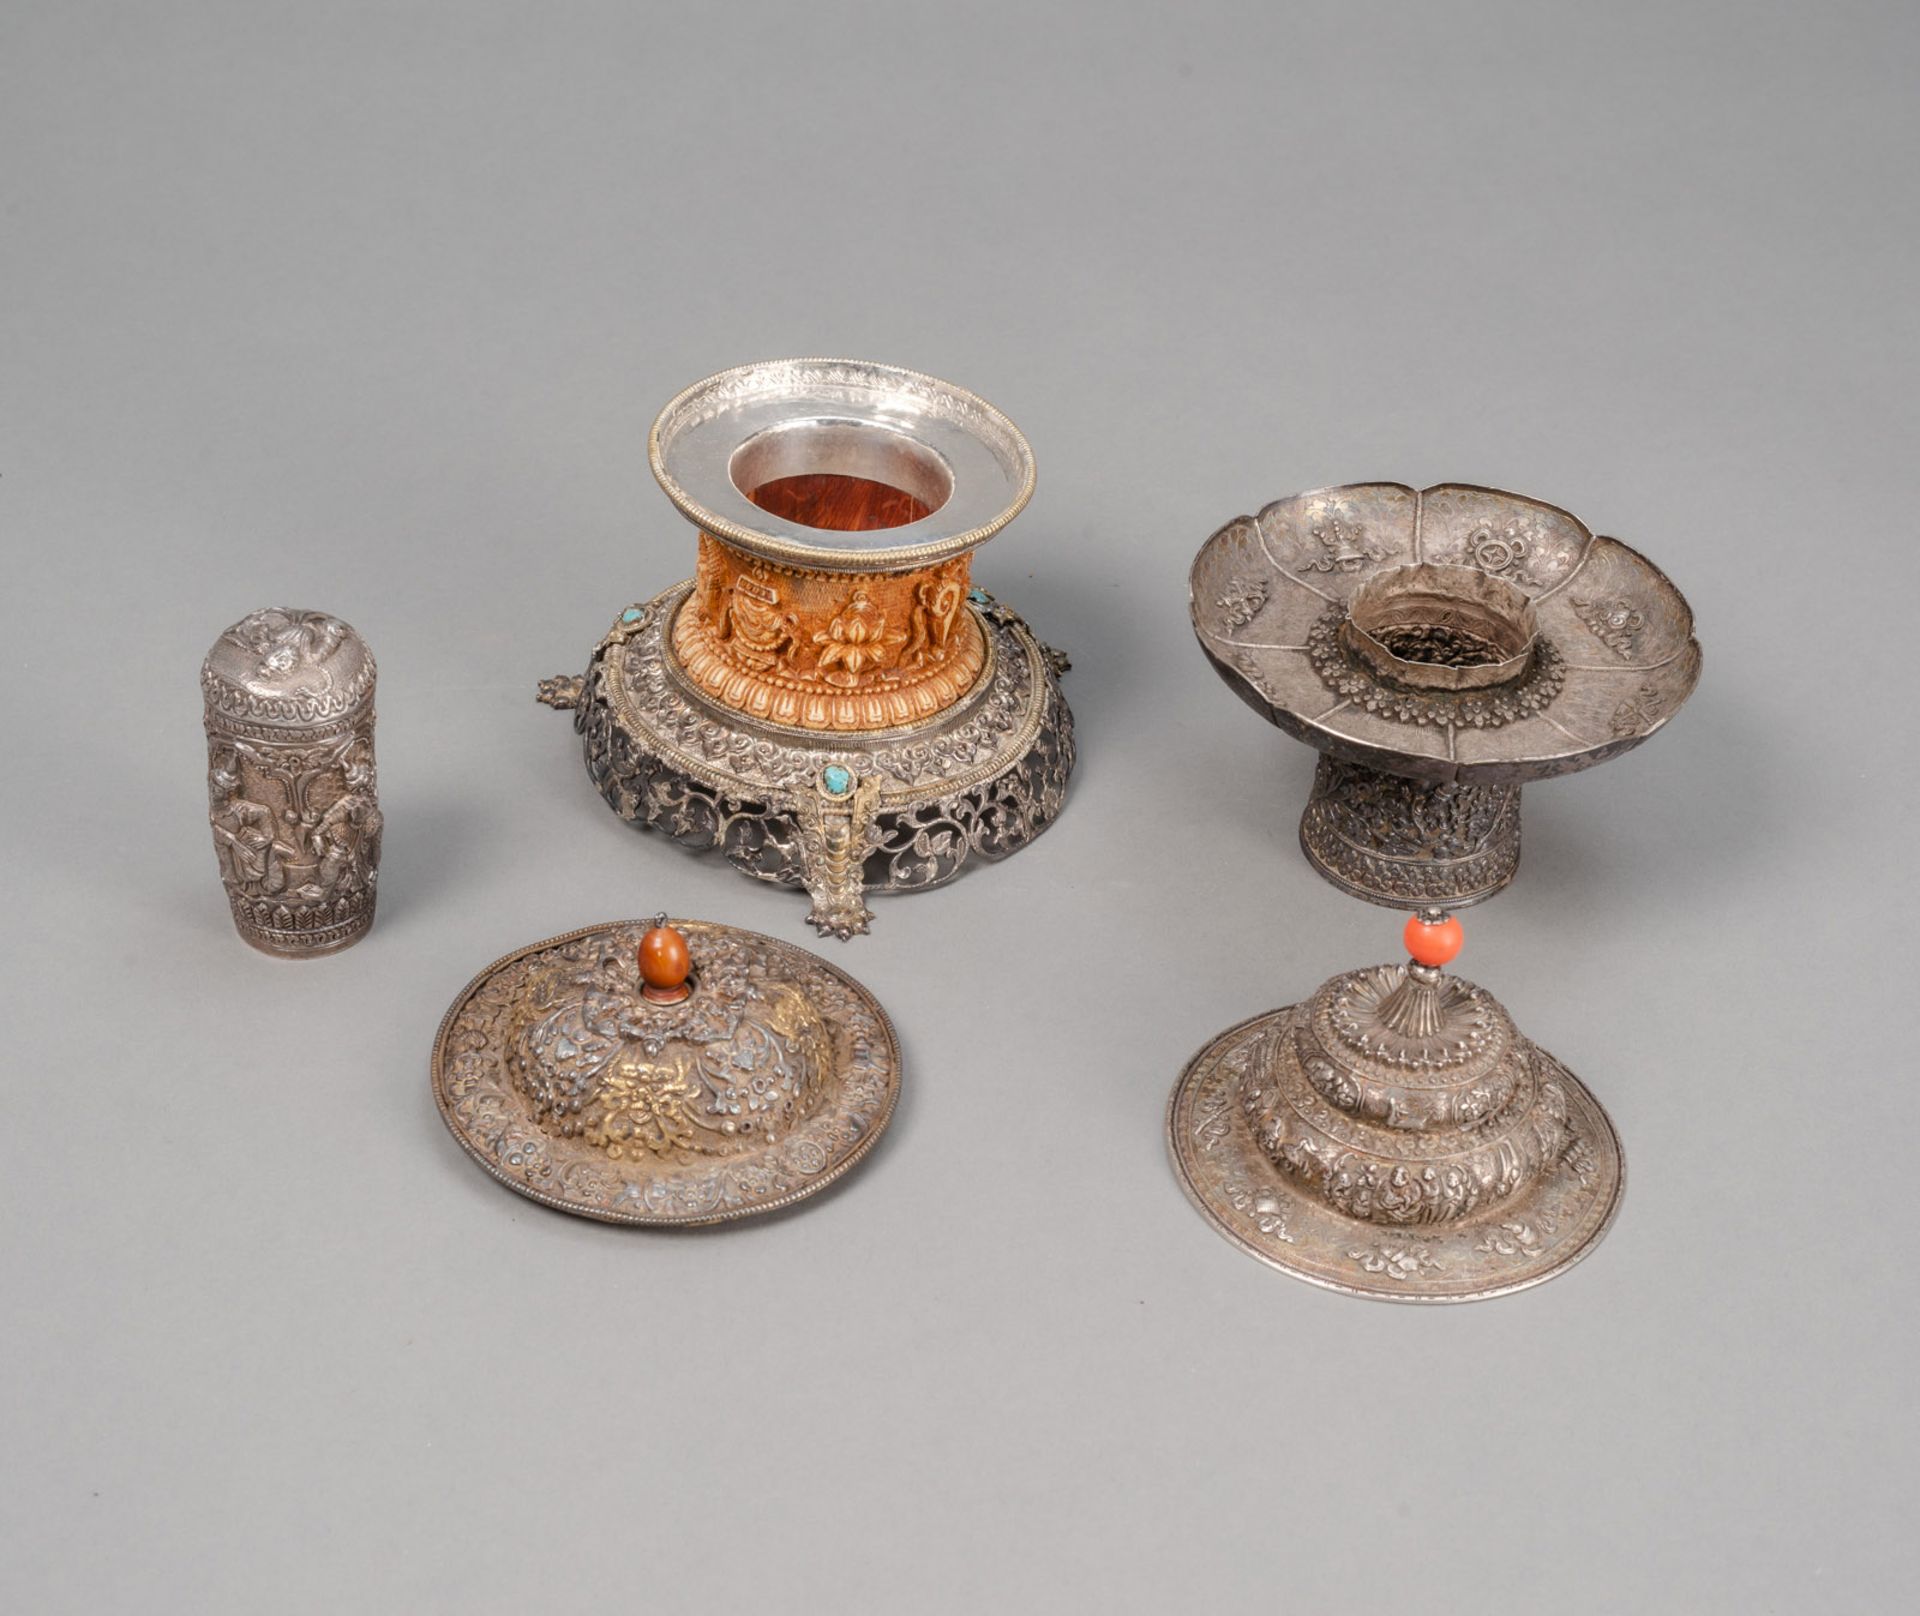 A PARCEL-GILT SILVER-MOUNTED BONE BOX AND COVER, A CUP STAND, AND A HANDLE - Image 2 of 4